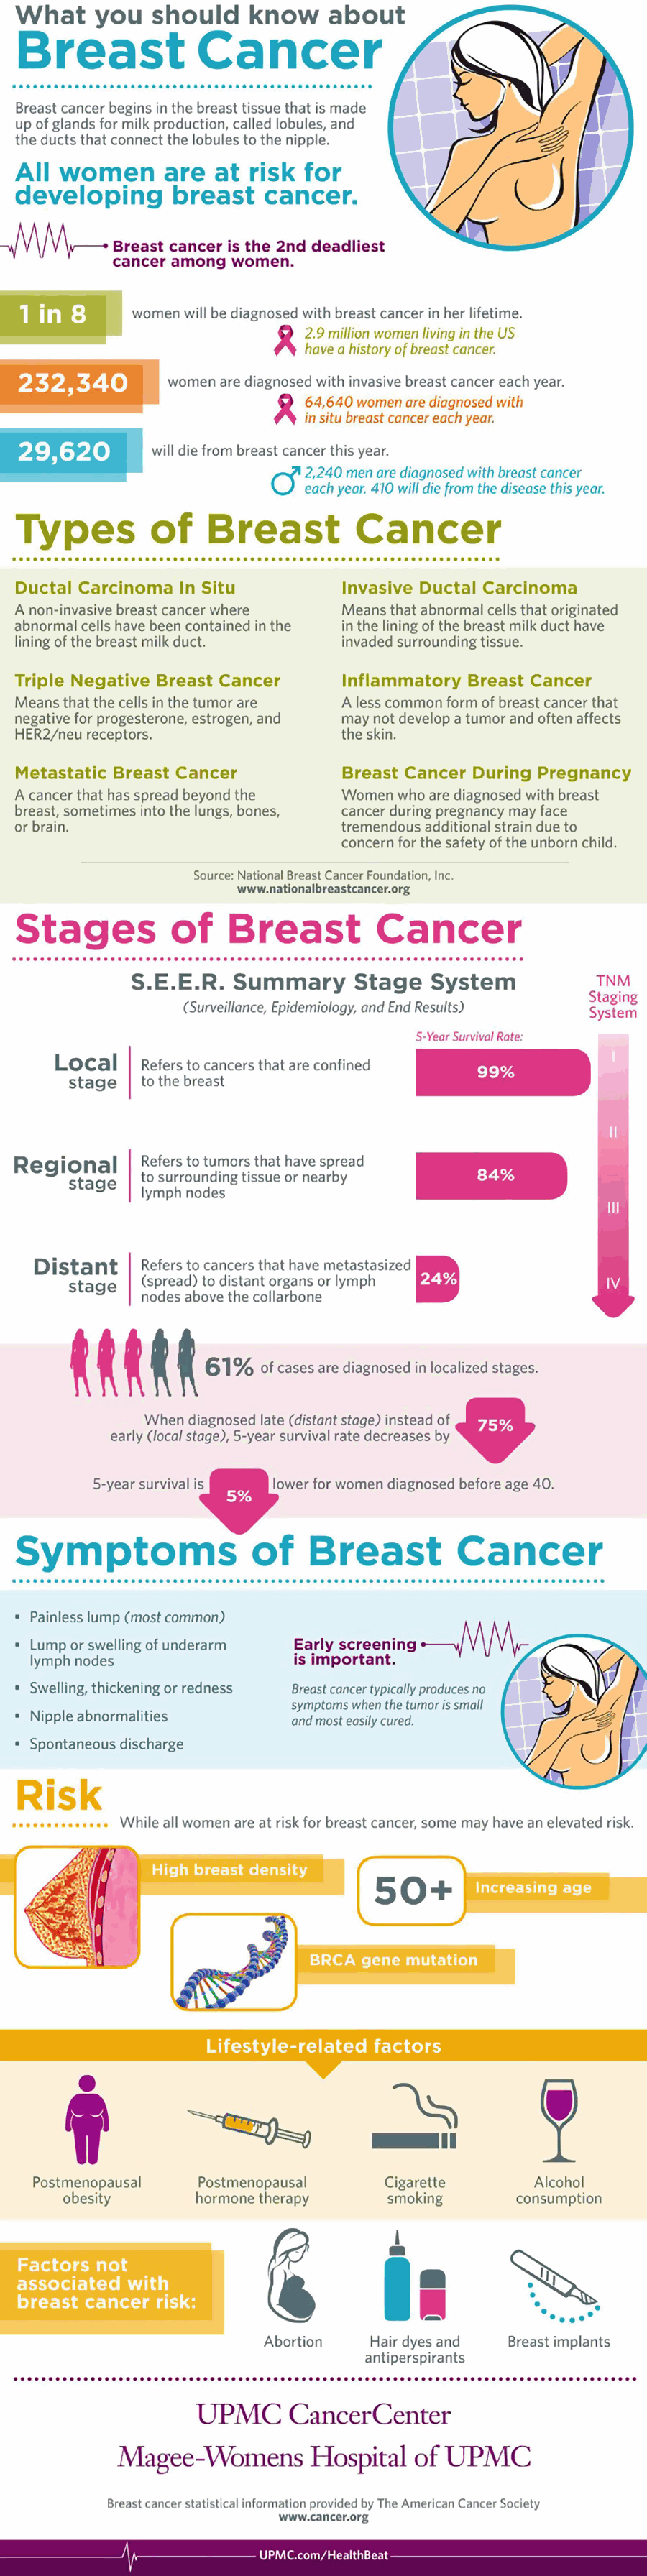 What You Should Know About Breast Cancer Infographic